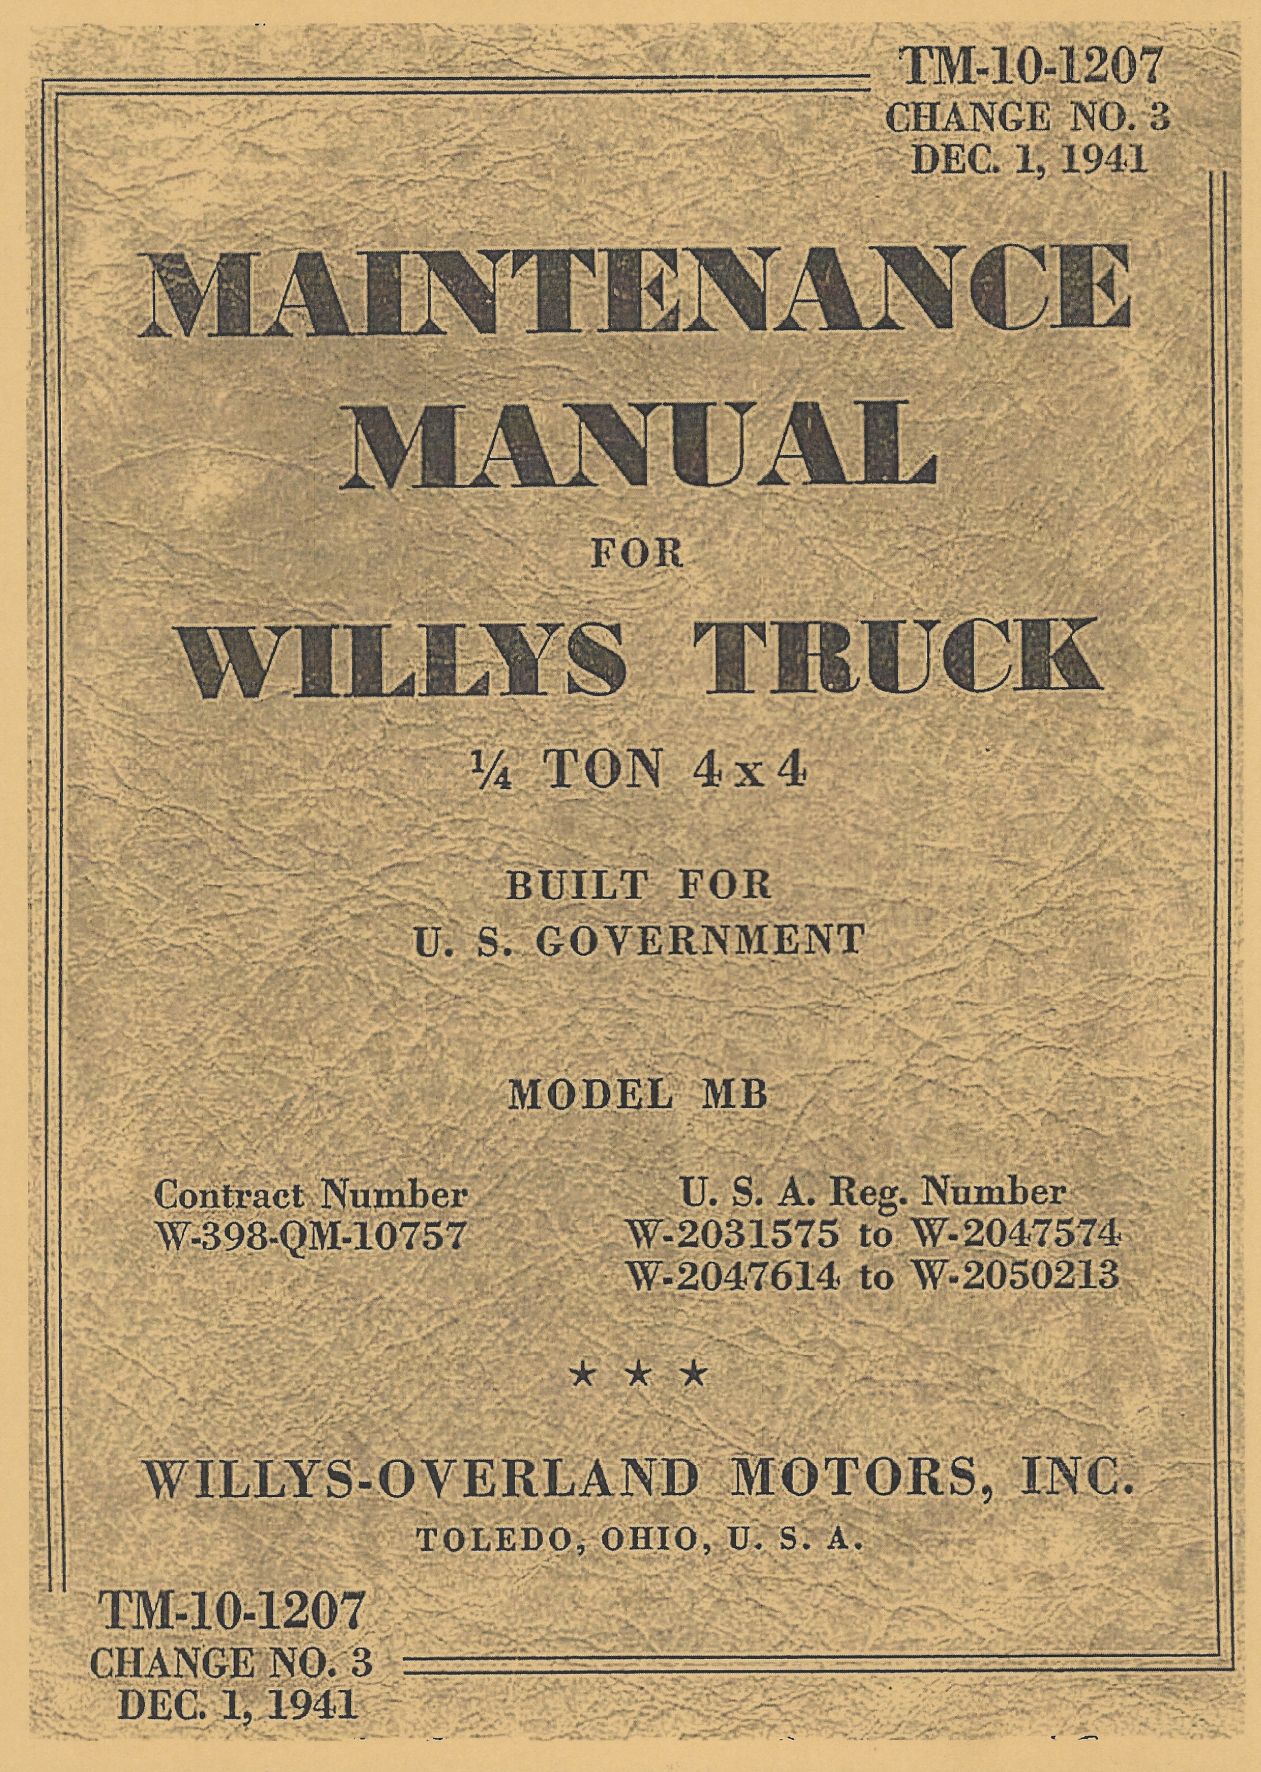 TM 10-1207 US MAINTENANCE MANUAL FOR WILLYS MB